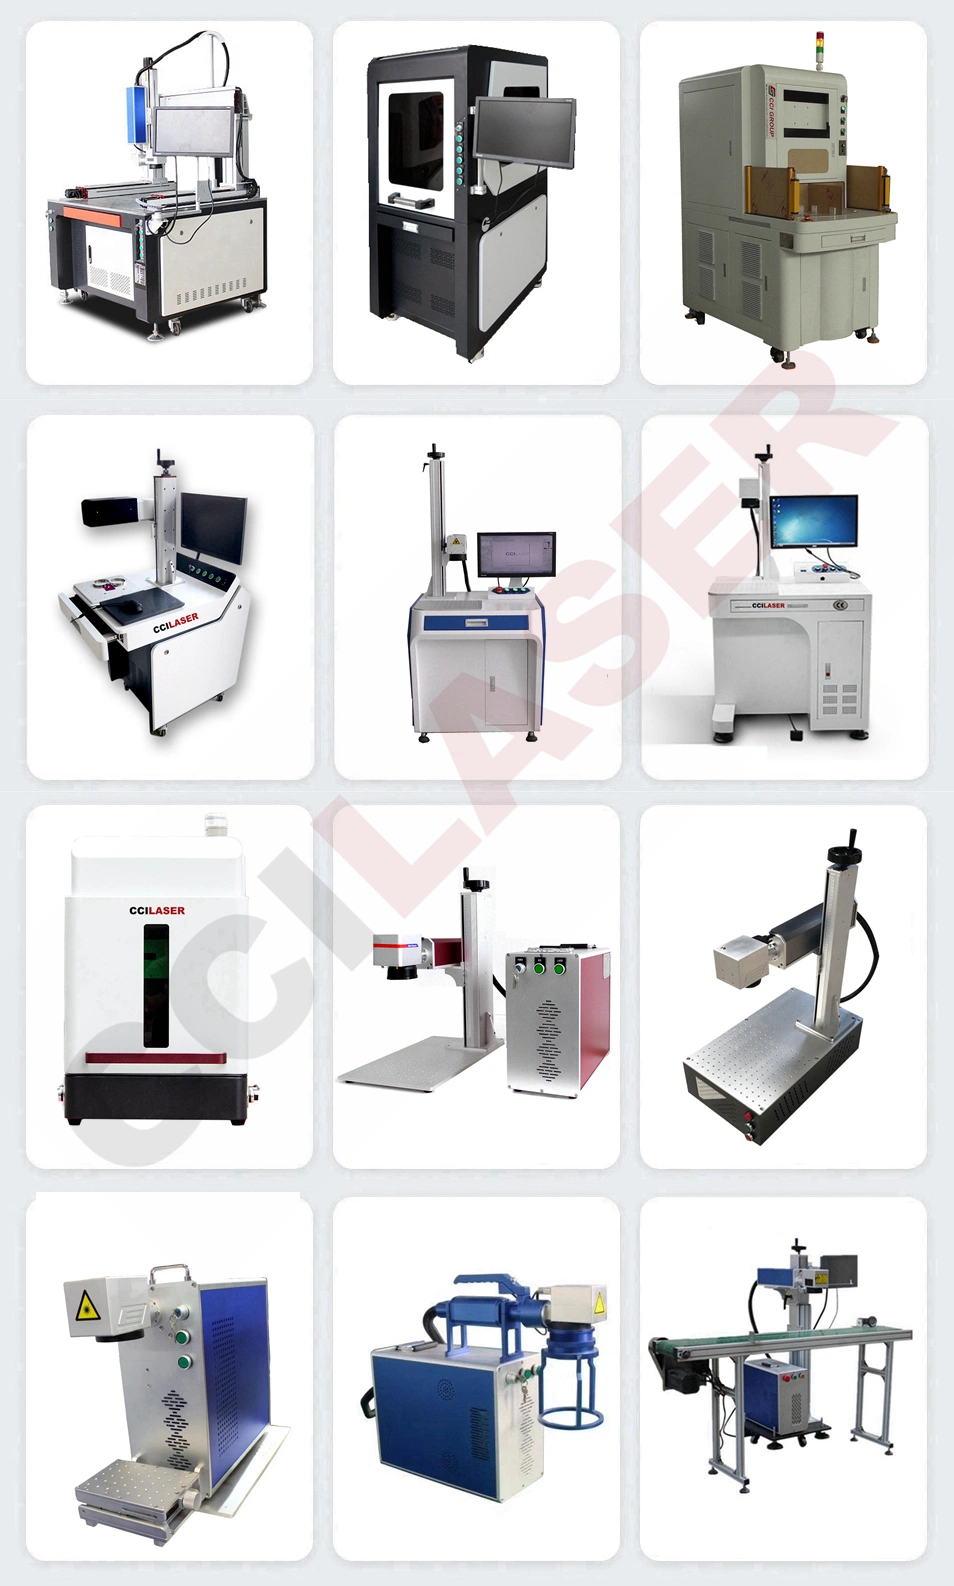 Enclosed Mini Logo Printing Machine for Marking Engraving Computer Parts Pens Metal Phone Case Plastic Numbering Steel Etching Jewelry PC Business Card